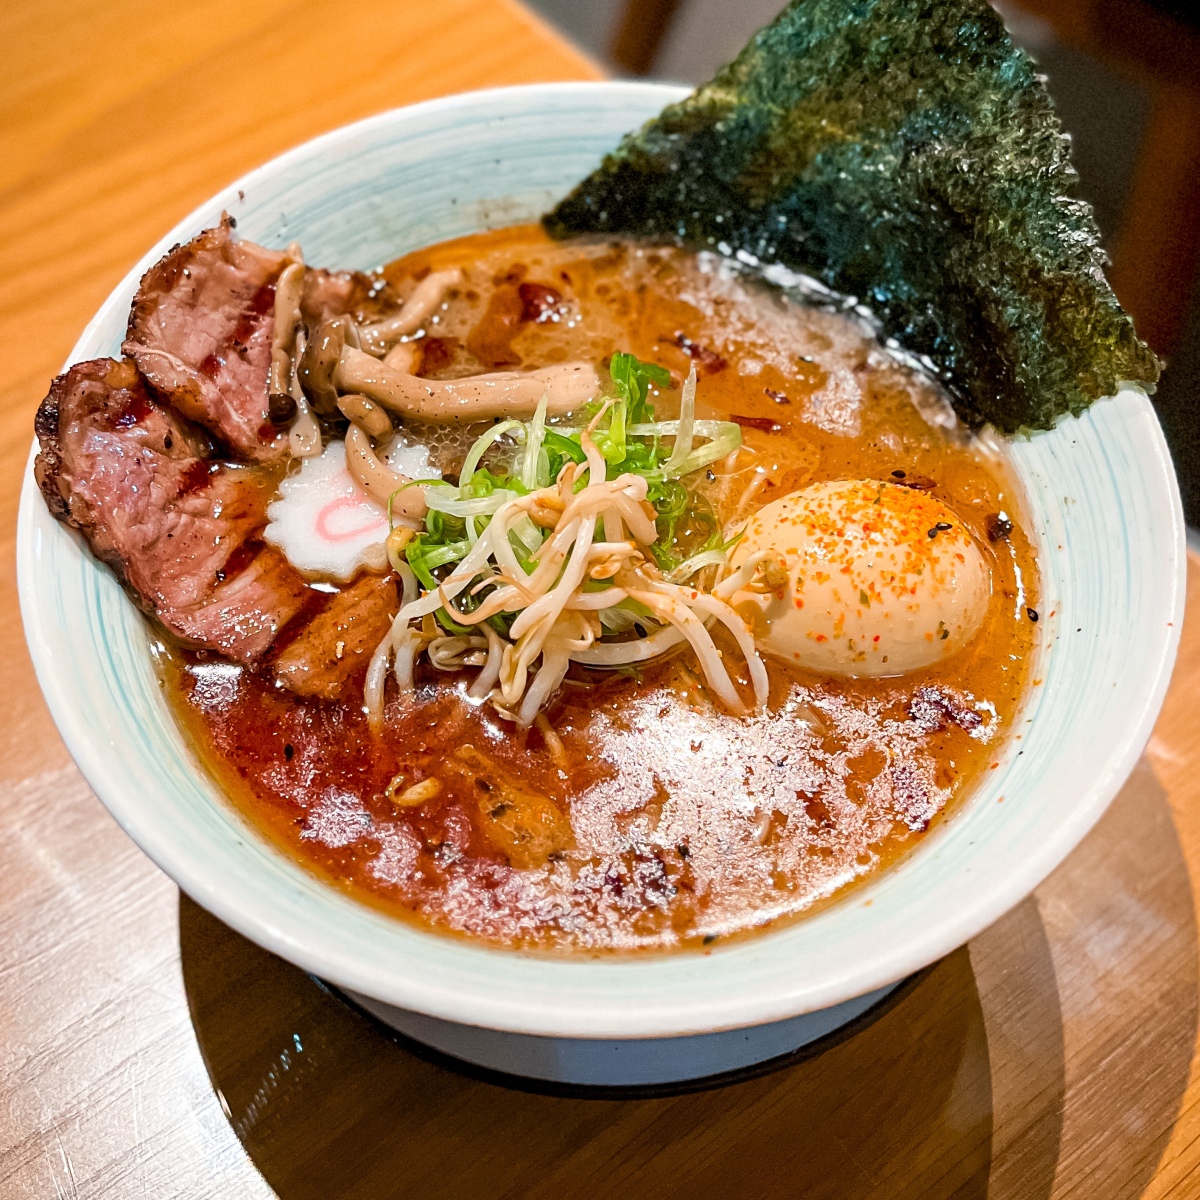 The 2nd Visit to try ‘Yasumi Ramen’s’ Latest Additions – Dhahran